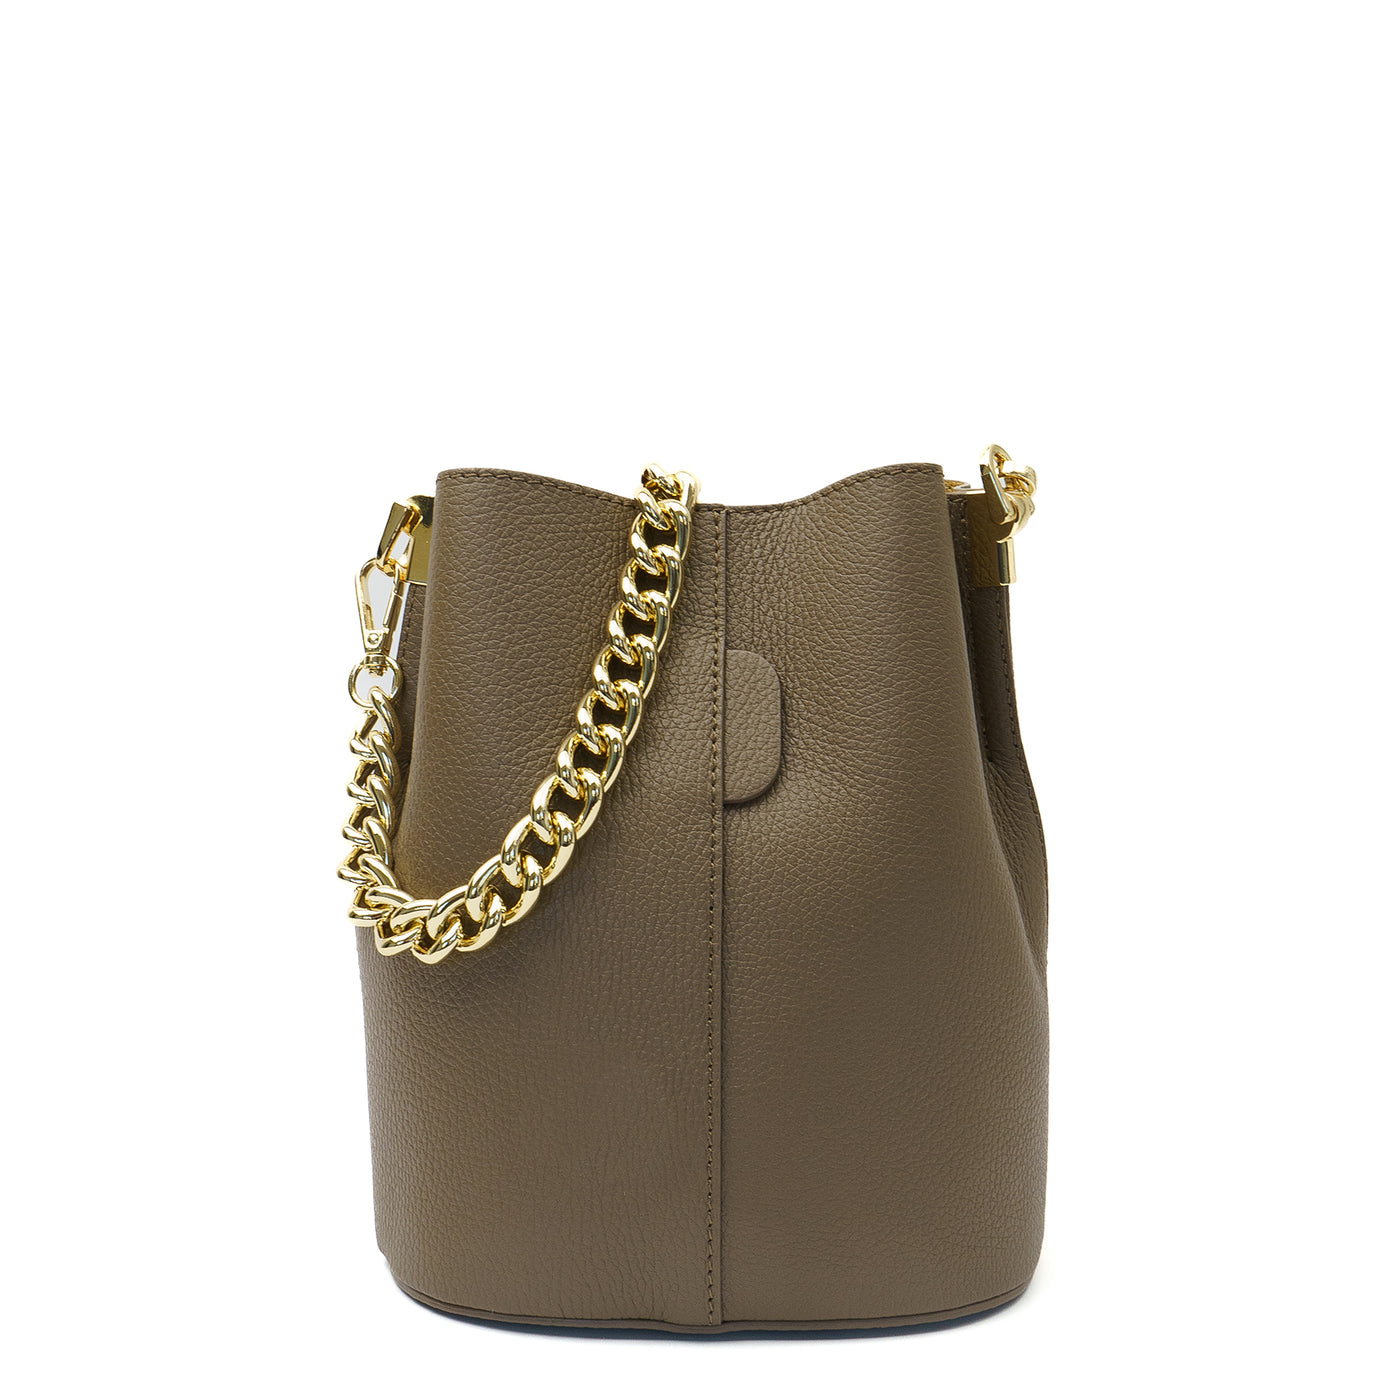 Leather bag "Ravenna midi" with leather chain, Taupe